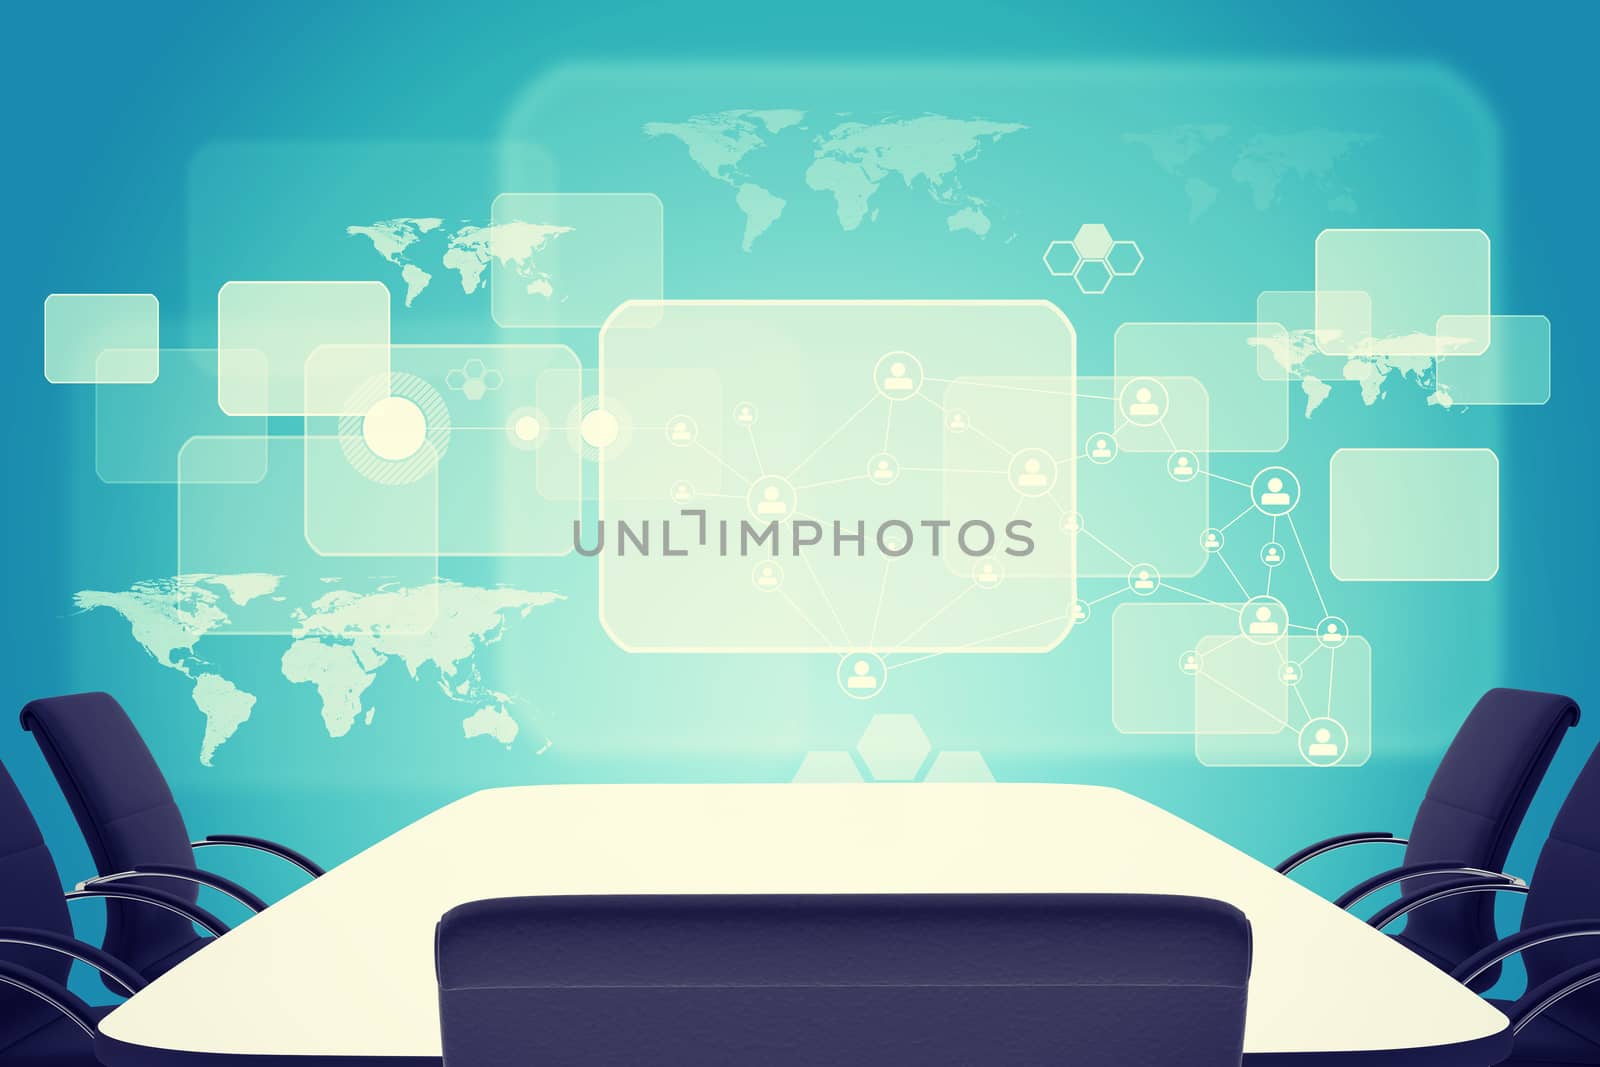 Abstract background with square shapes, world map and table with chairs in the centre. Inetrnet connection